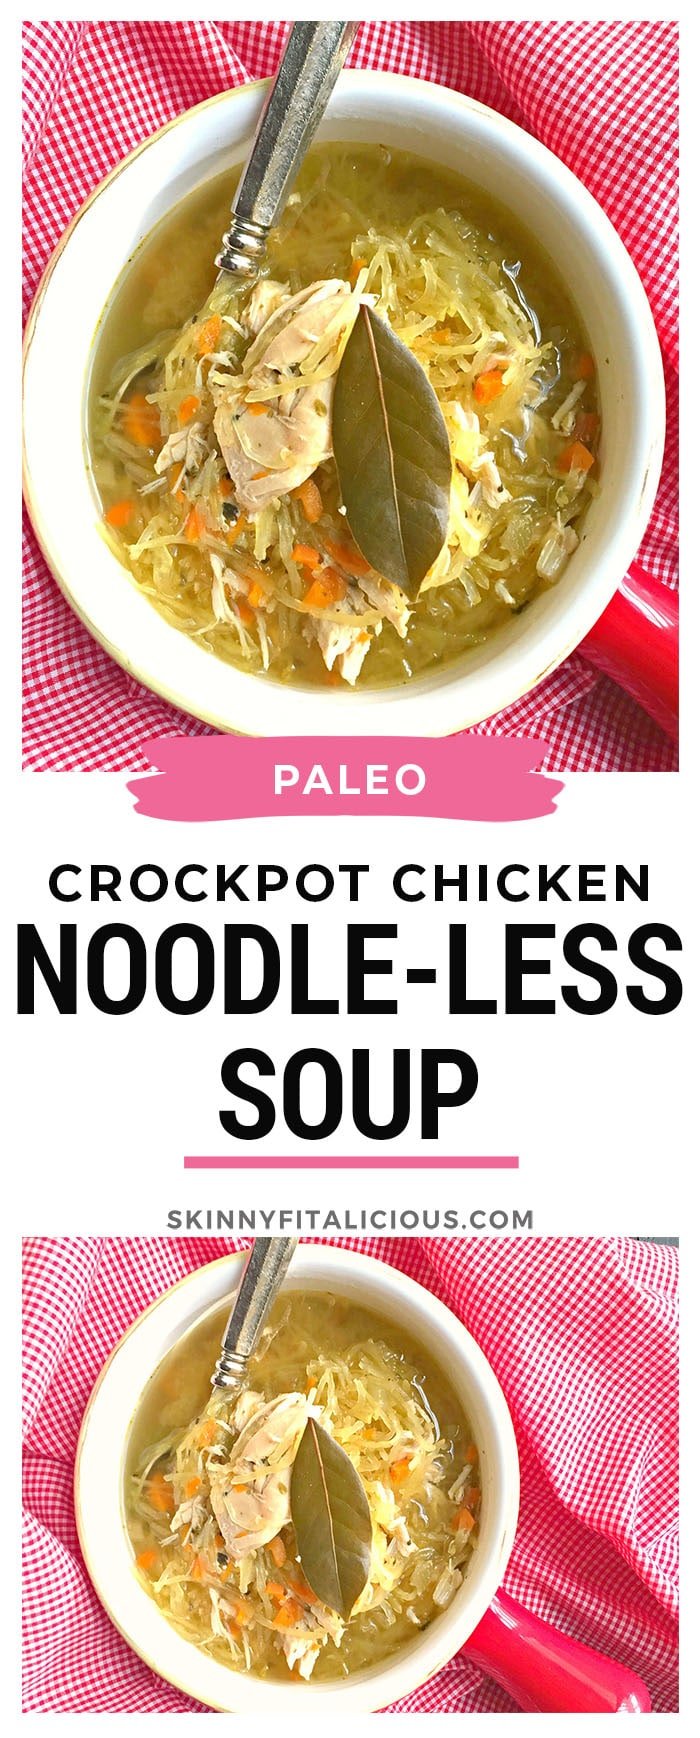 A Paleo twist on classic chicken noodle soup, this low carb Chicken Noodle-less Soup is packed with wholesome & comforting ingredients! Gluten Free + Paleo + Low Calorie